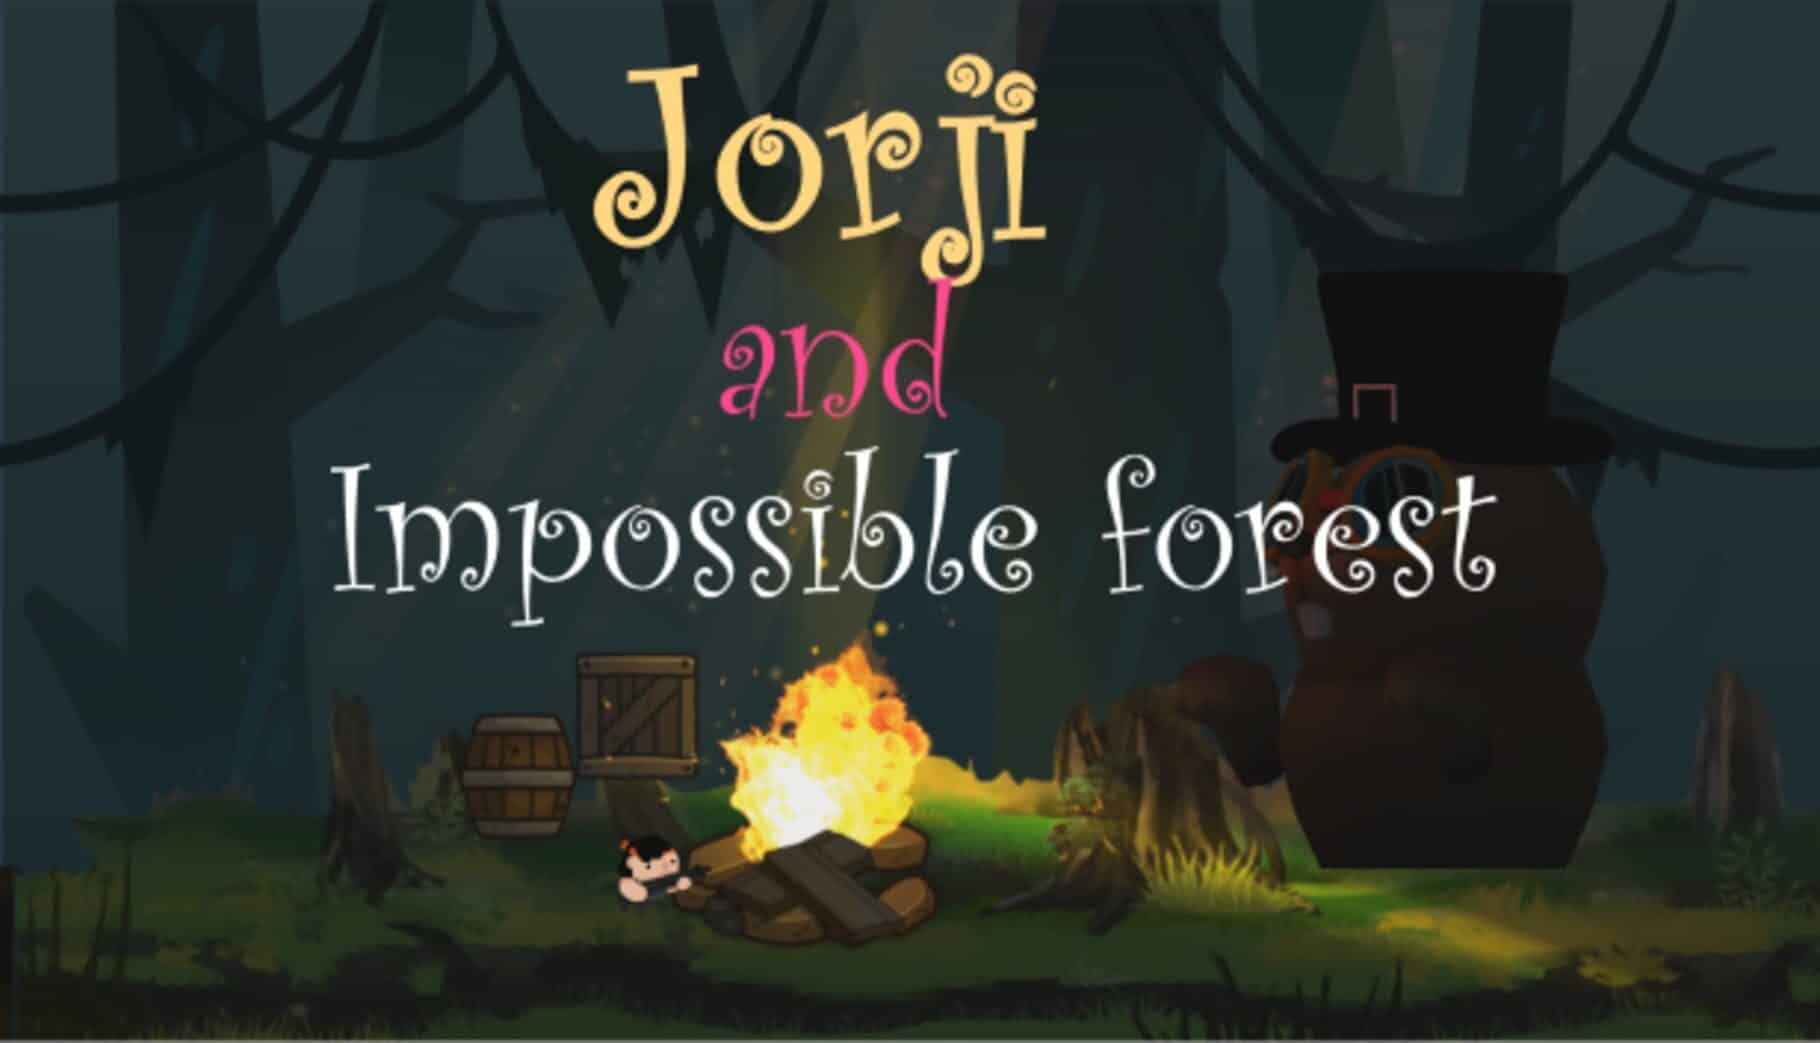 Jorji and Impossible Forest